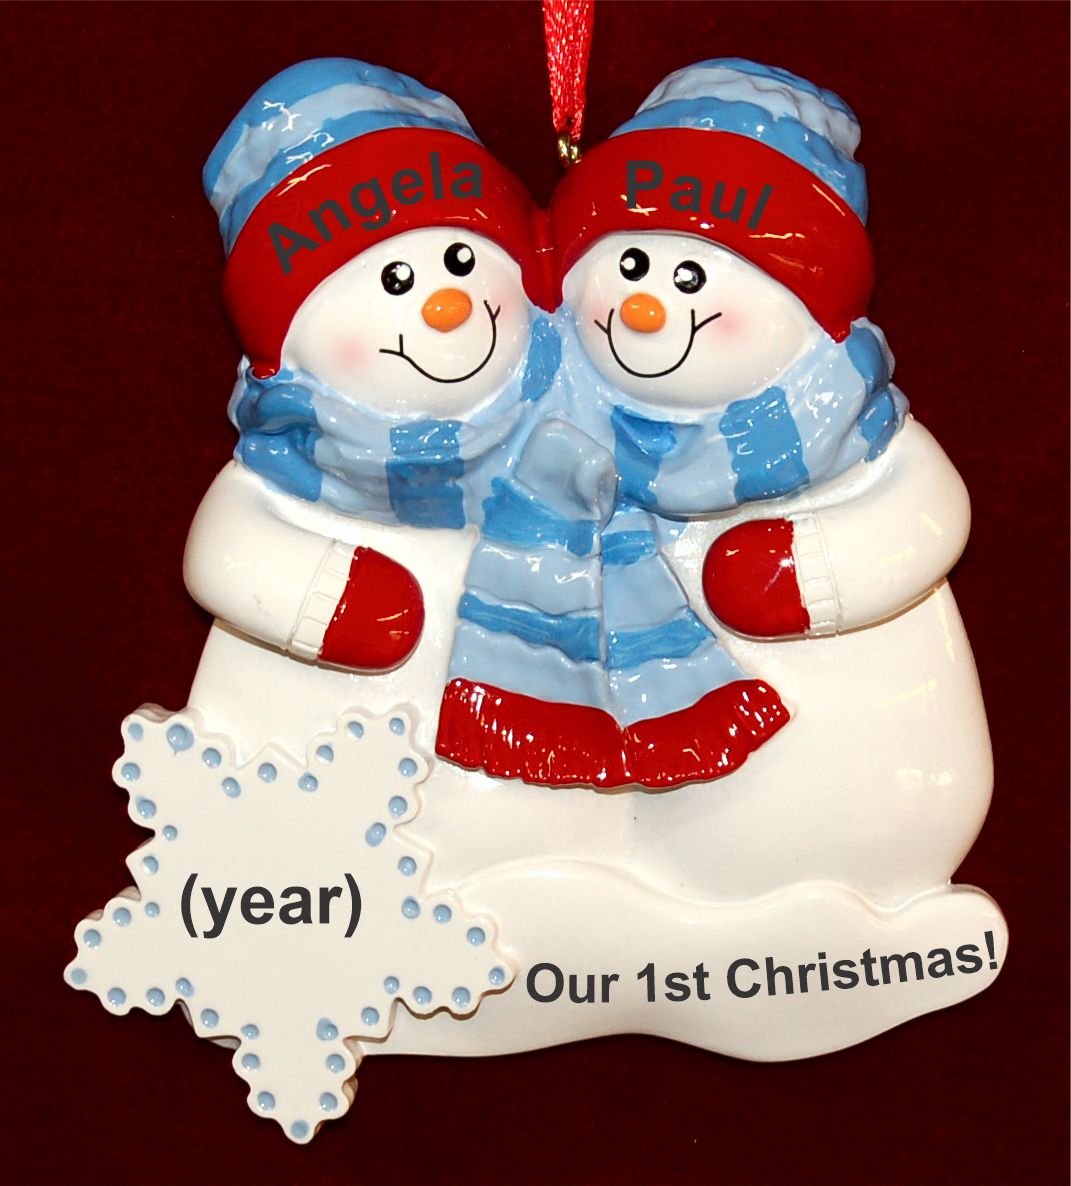 Our 1st Christmas Together Ornament Personalized FREE by Russell Rhodes